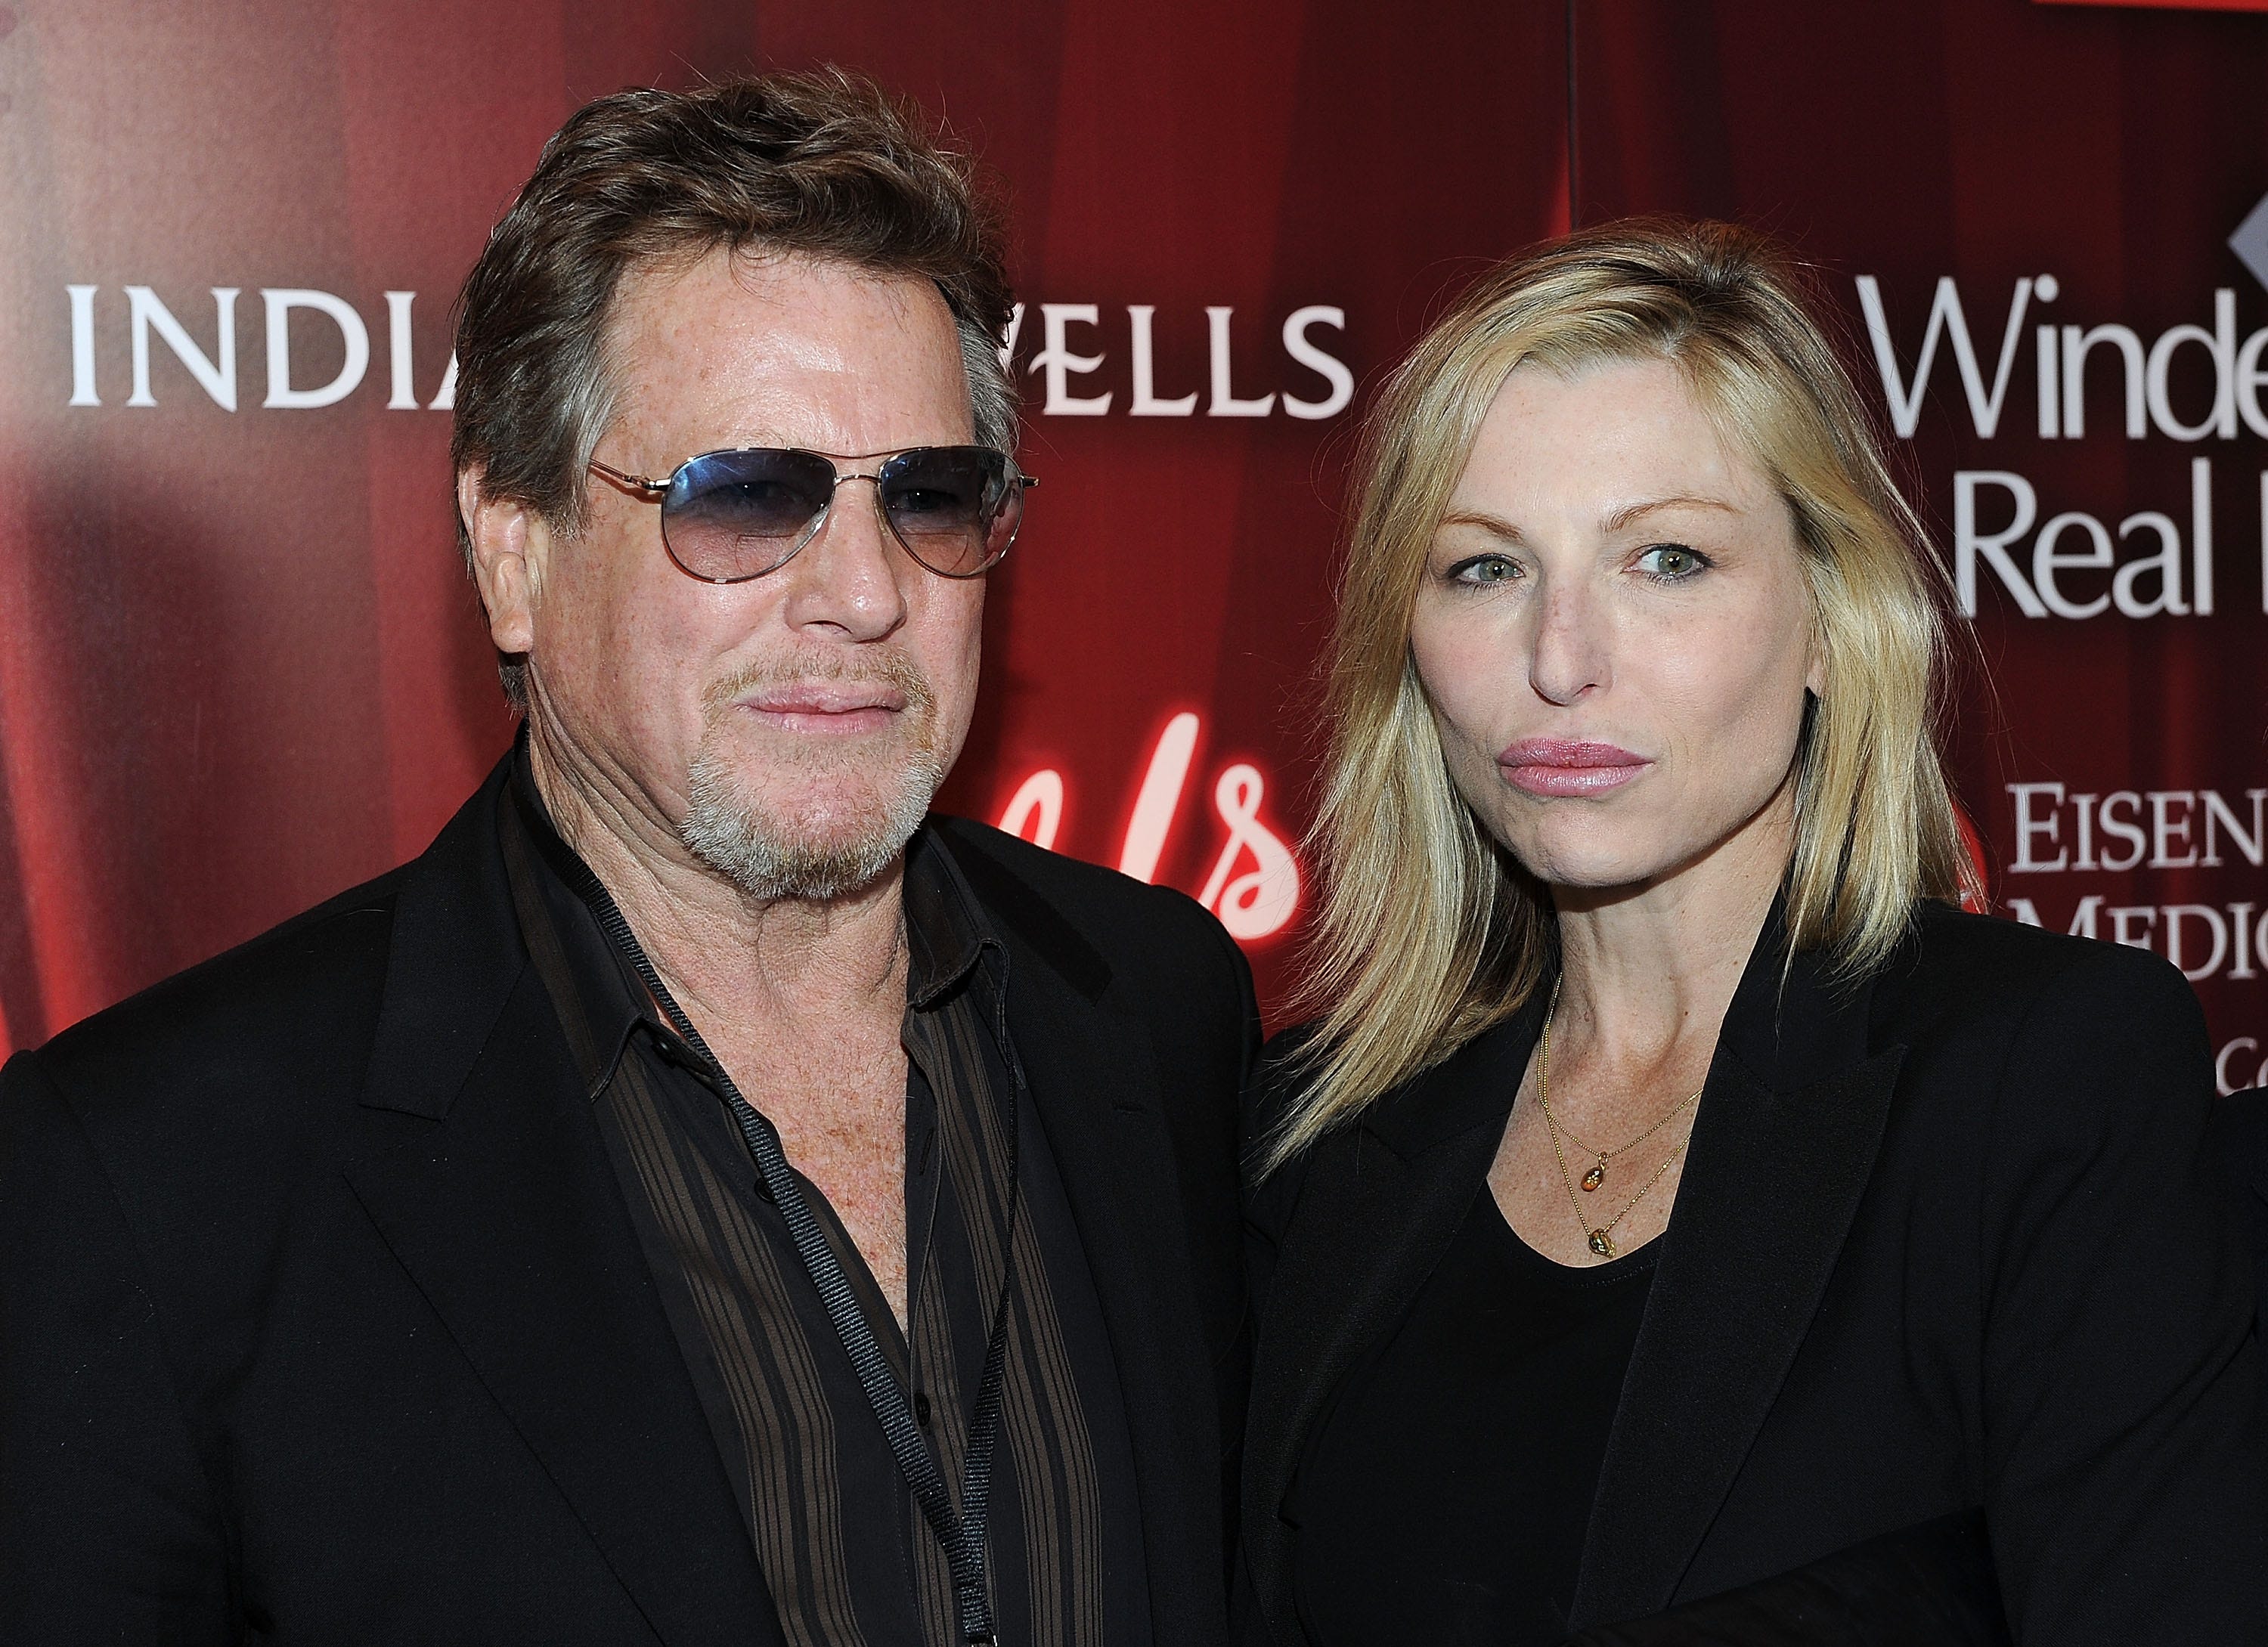 Tatum O’Neal wants to mend relationship with her father after her near-death overdose: ‘I miss him terribly'